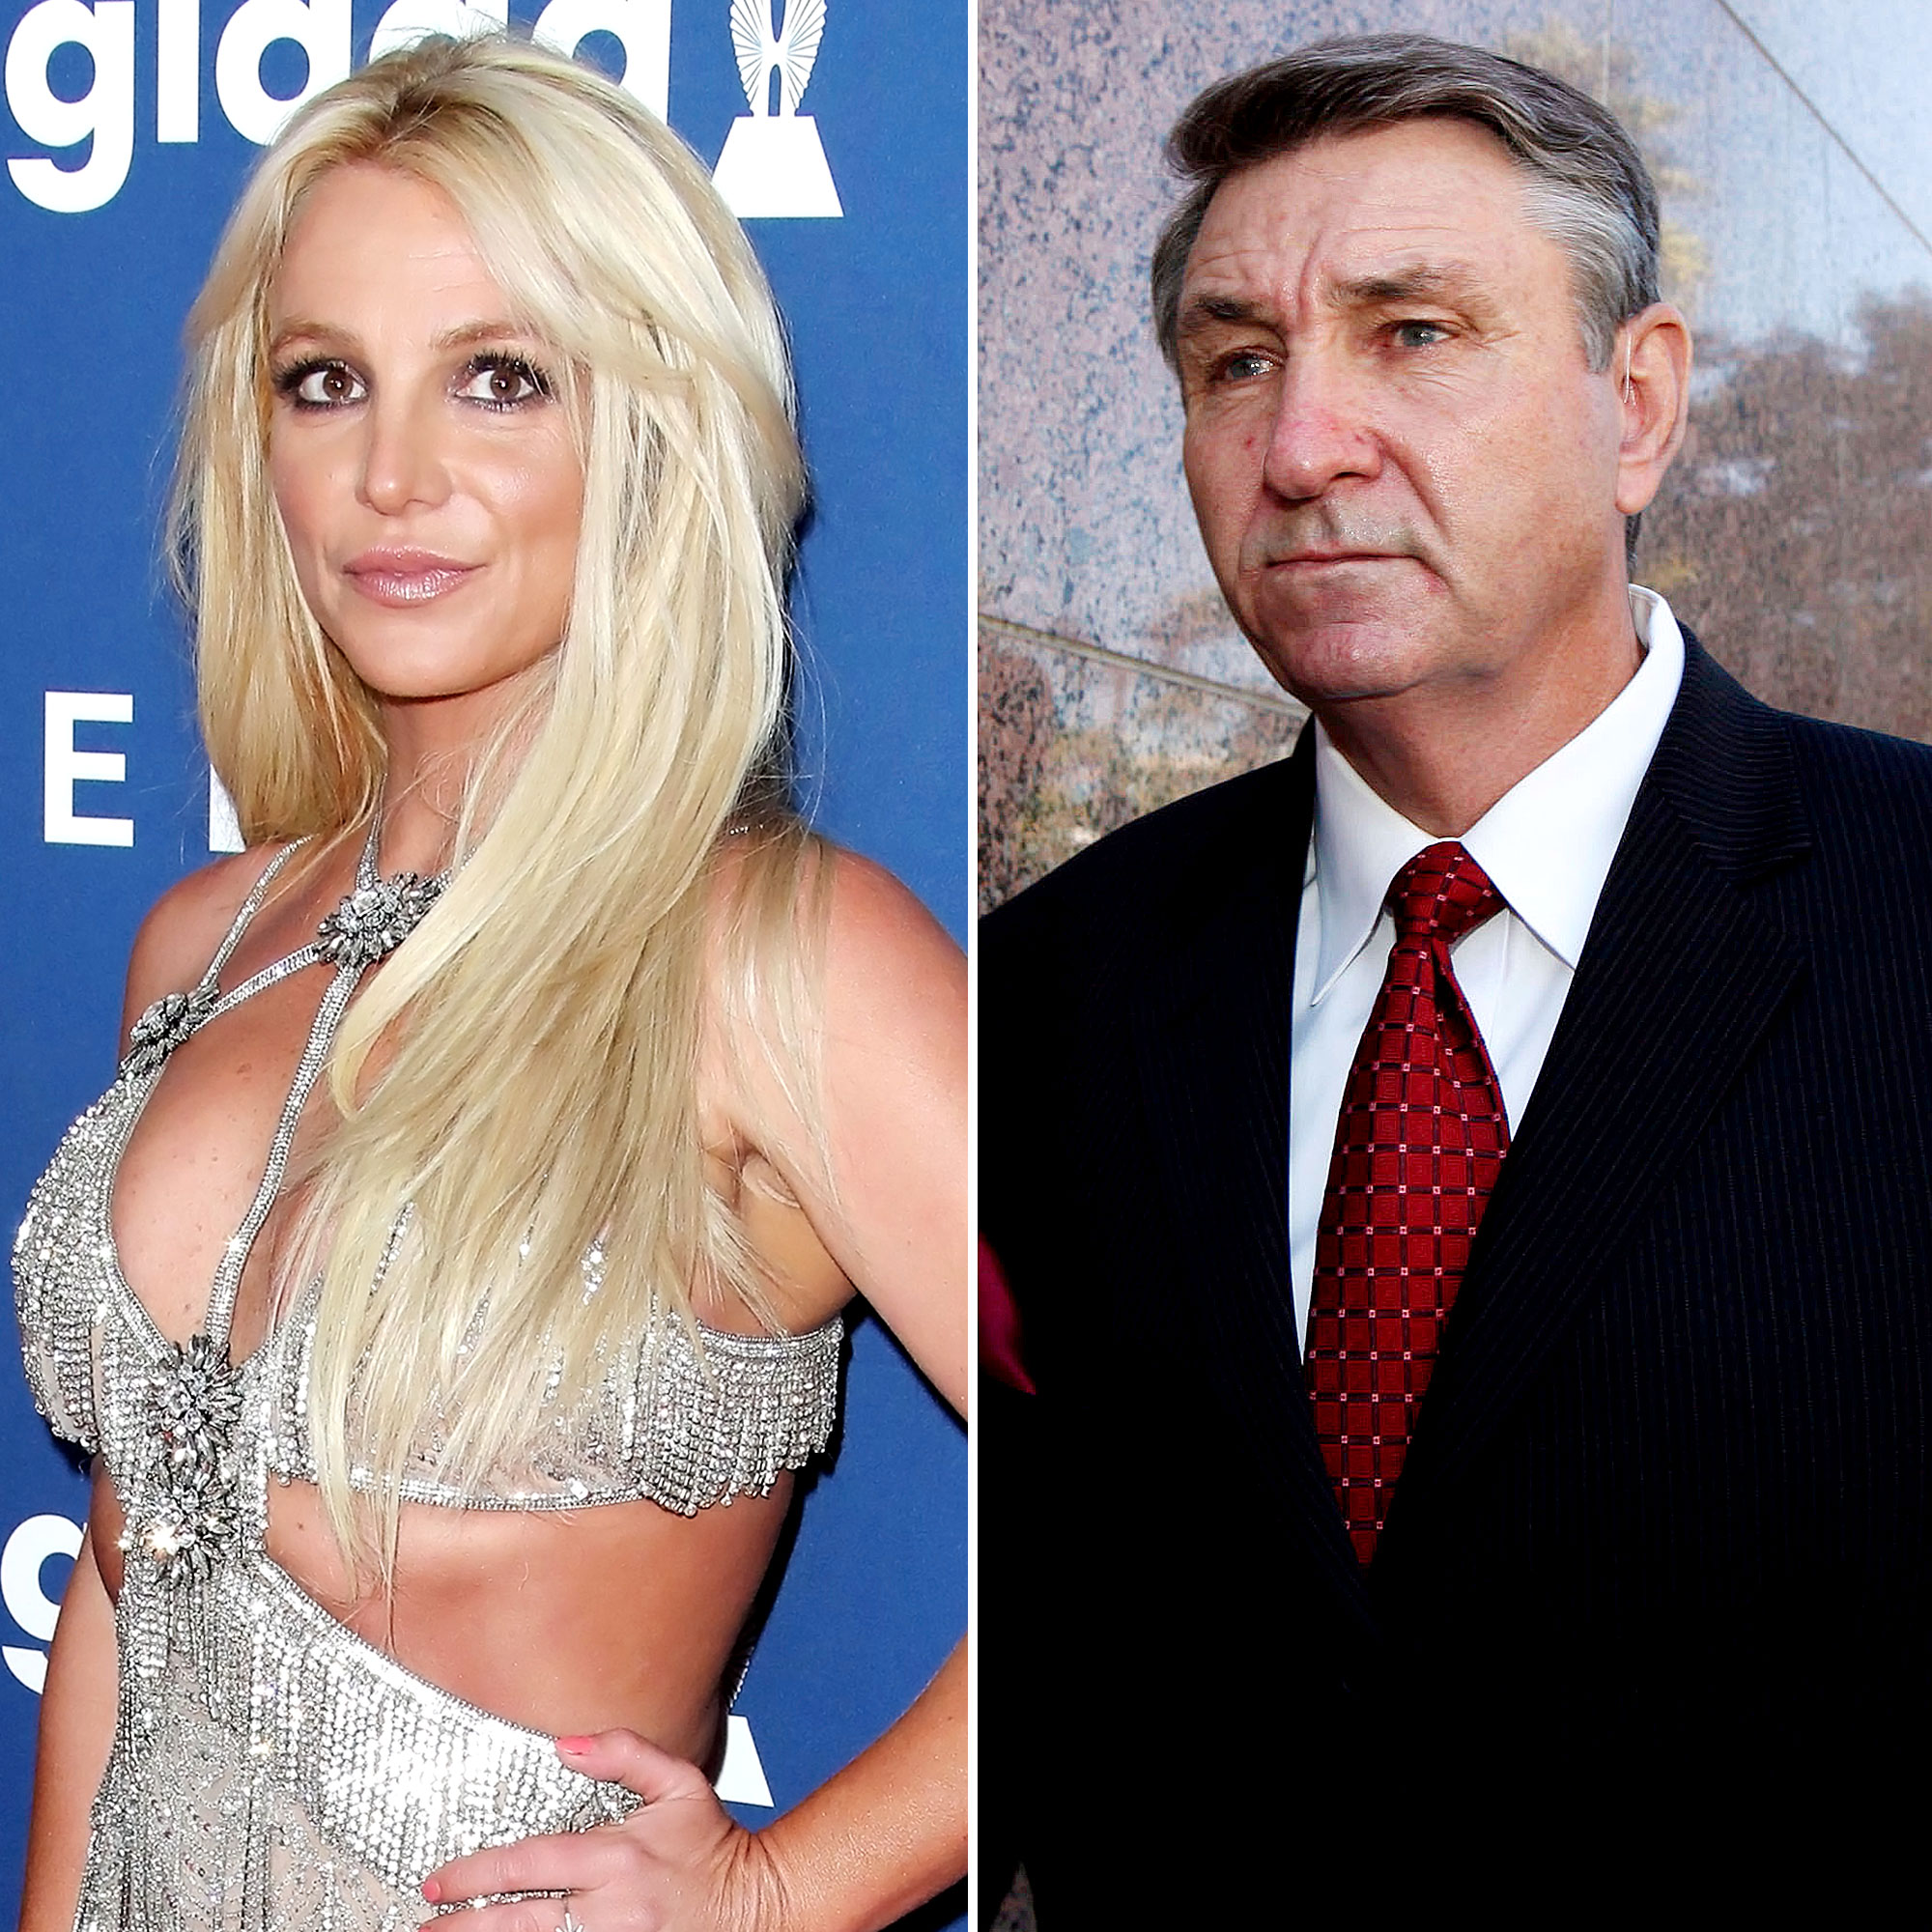 Britney Spears Files to Have Dad Jamie Permanently Removed as Her